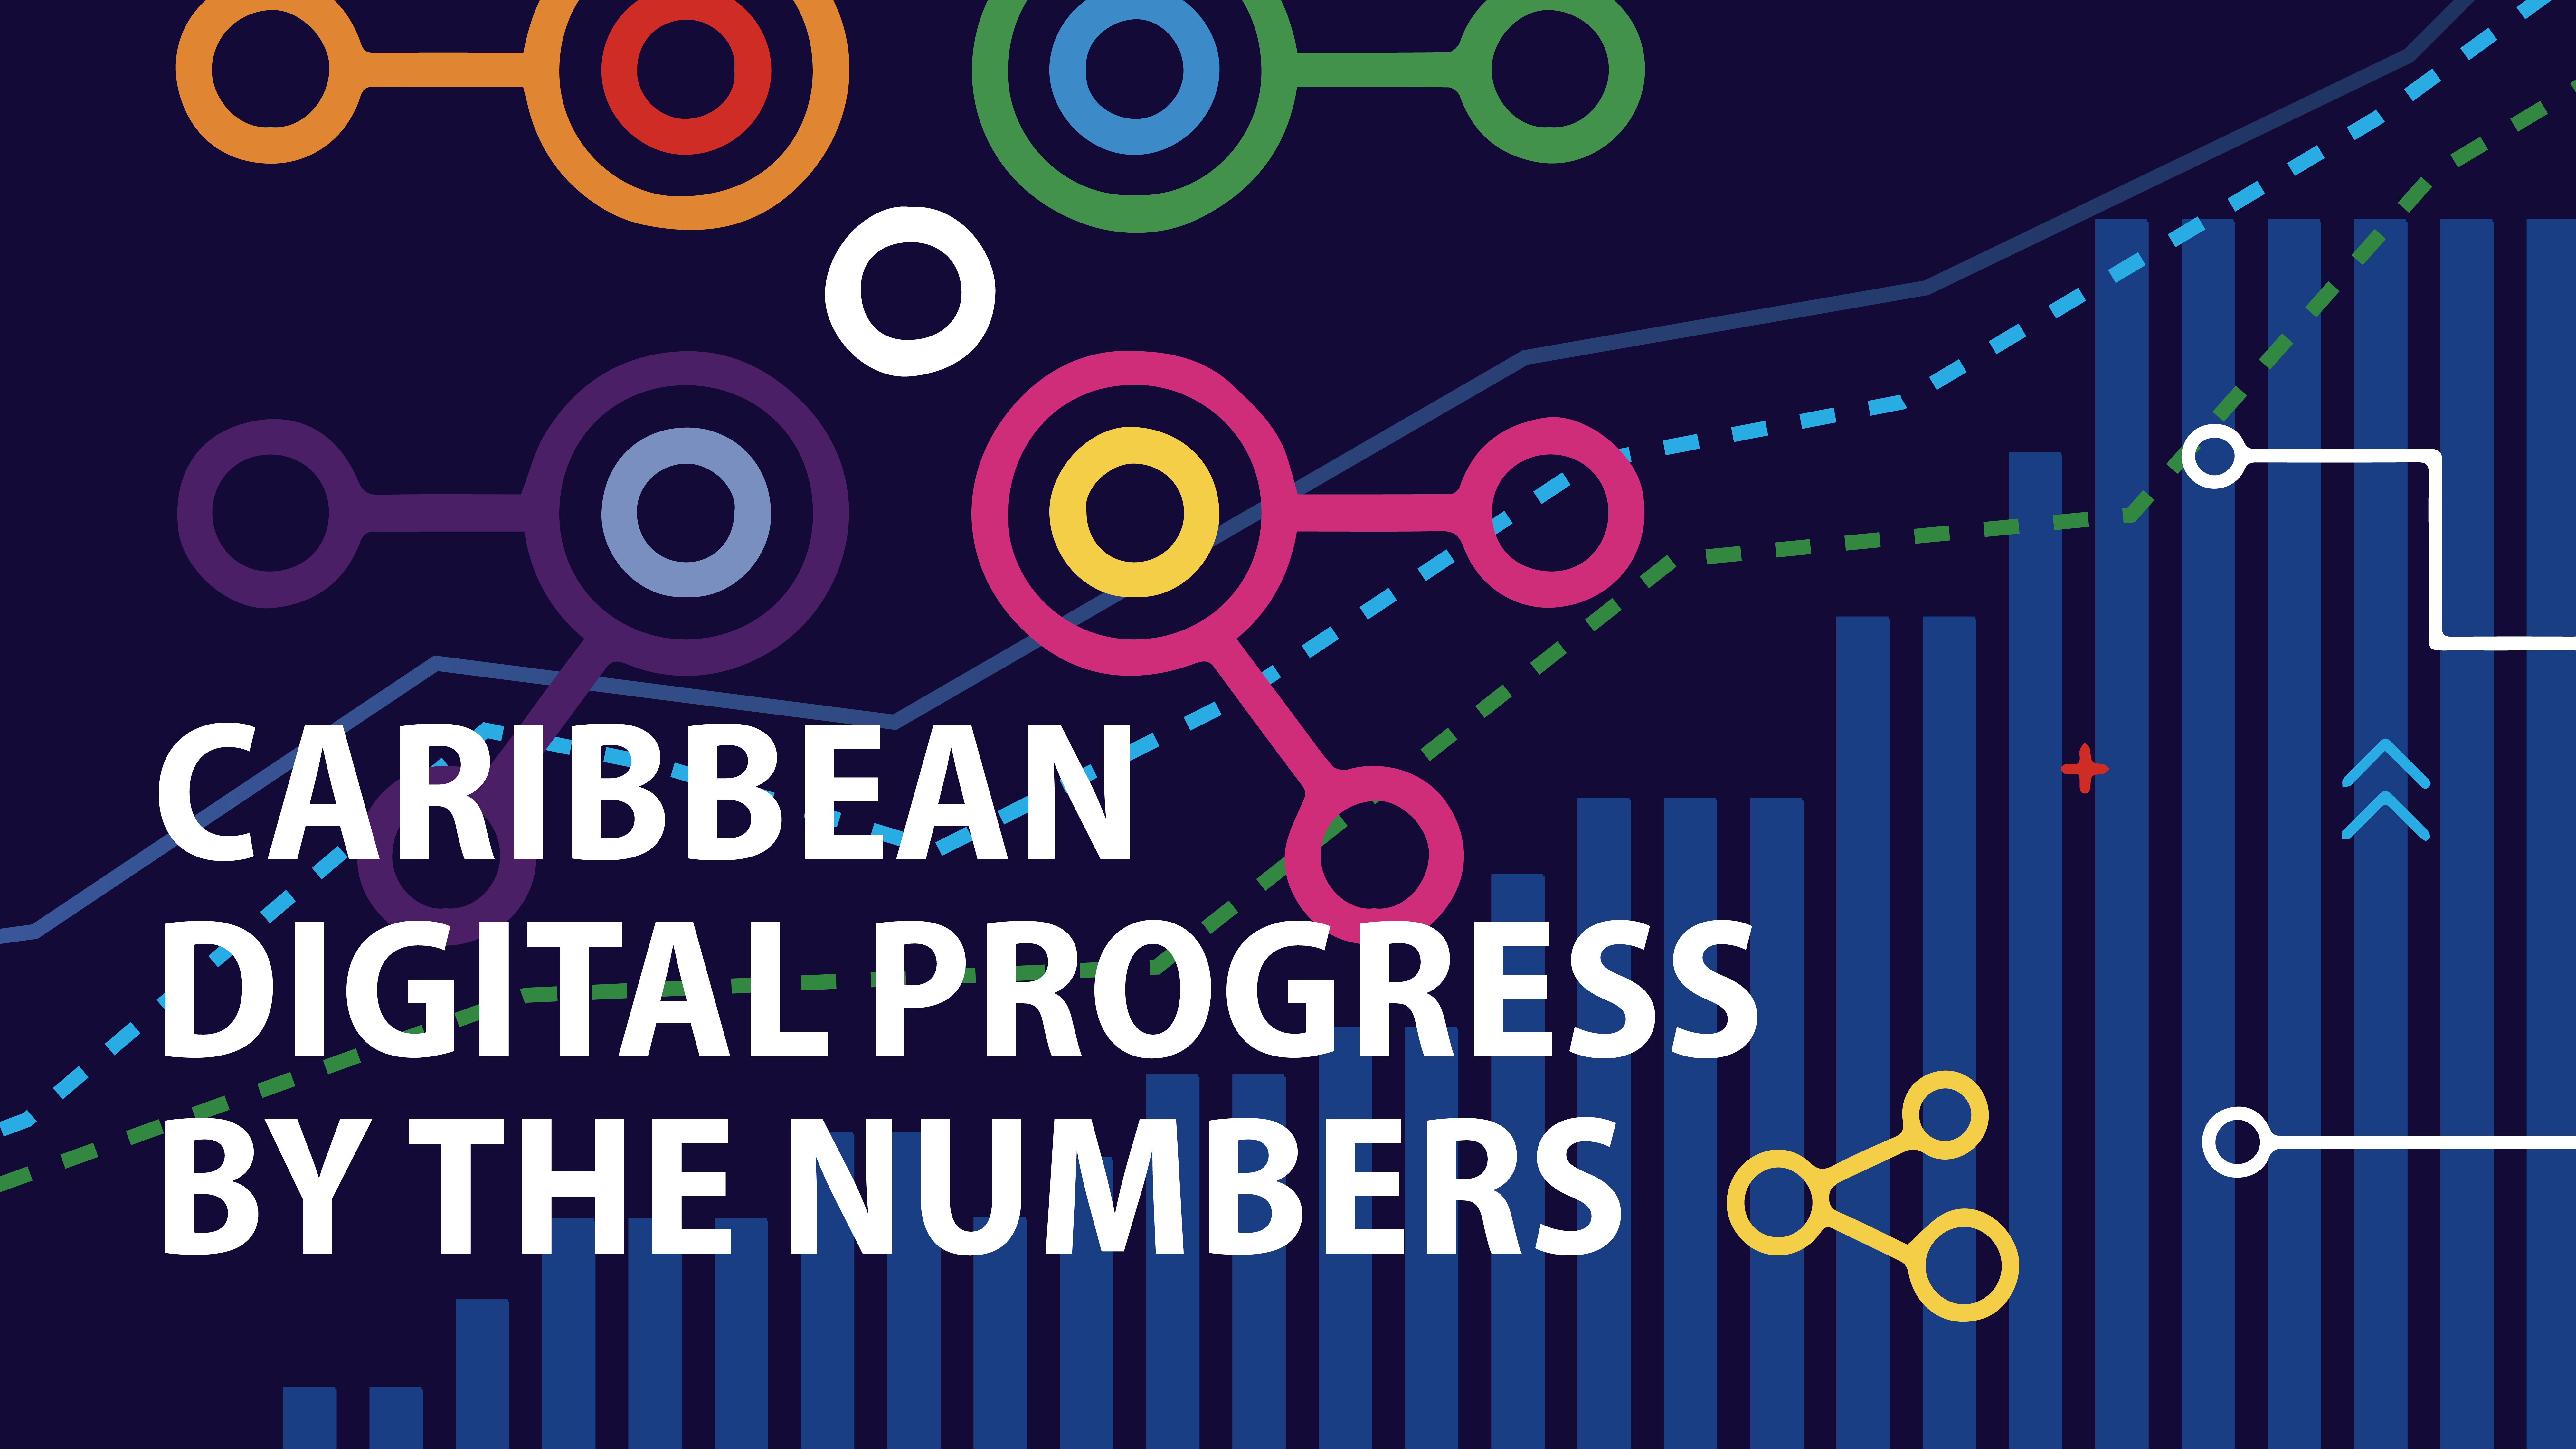 Caribbean Digital Progress by the Numbers